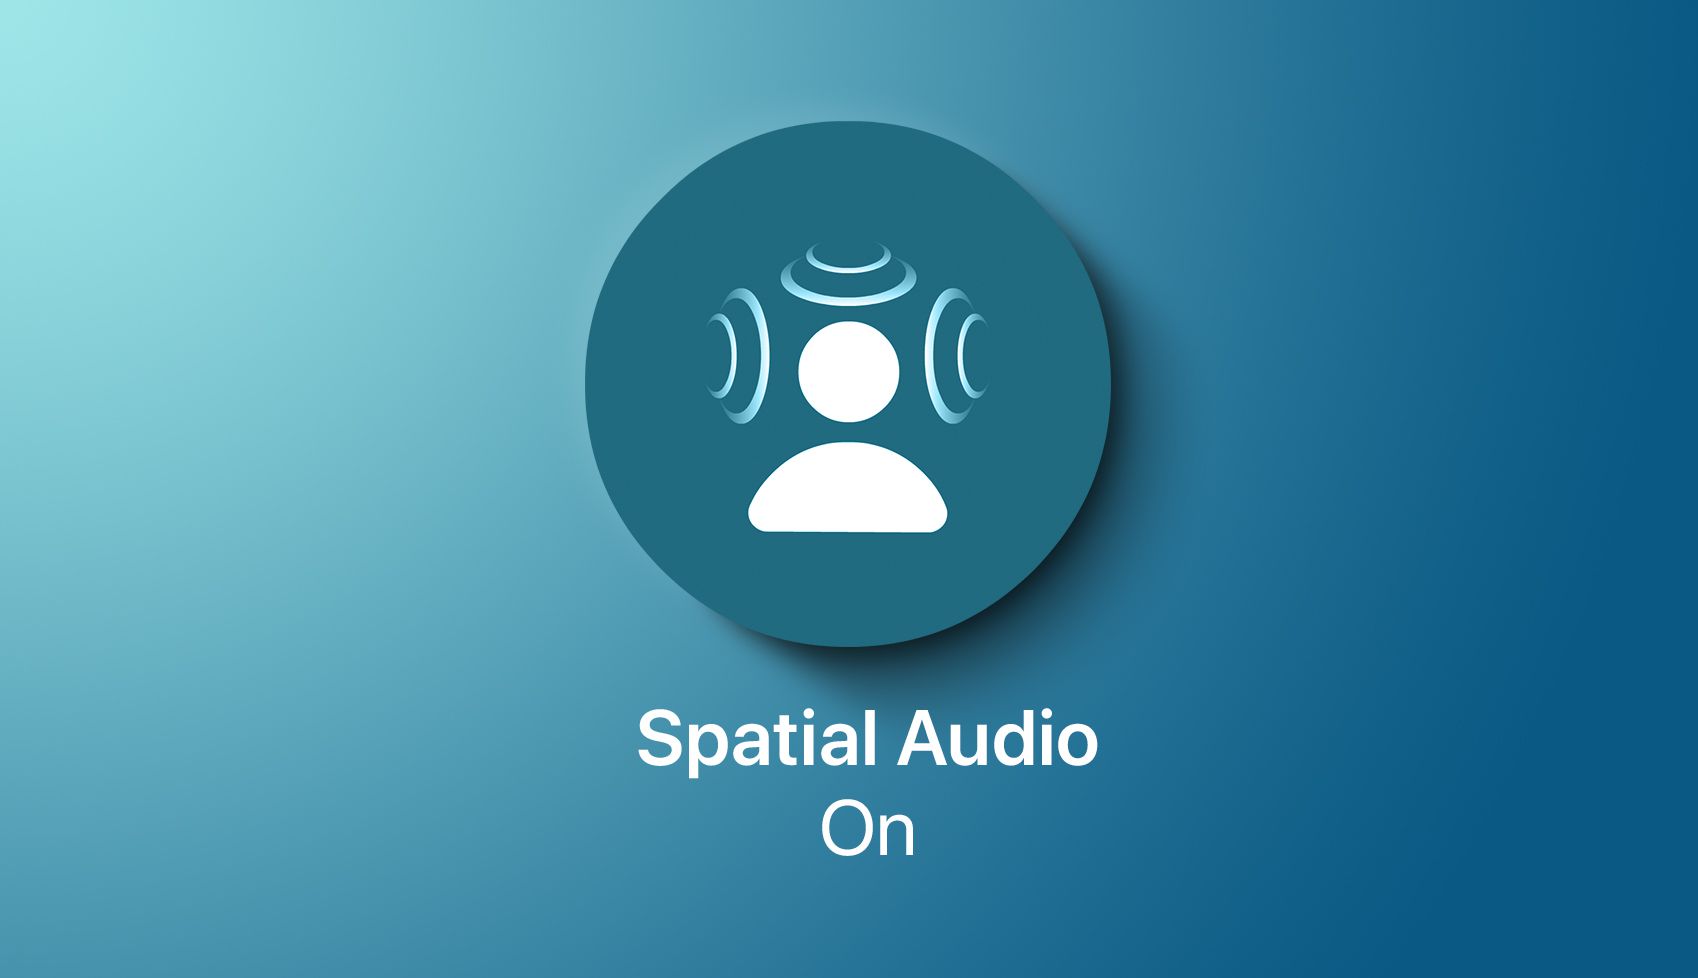 All the apps that support Apple’s spatial audio feature